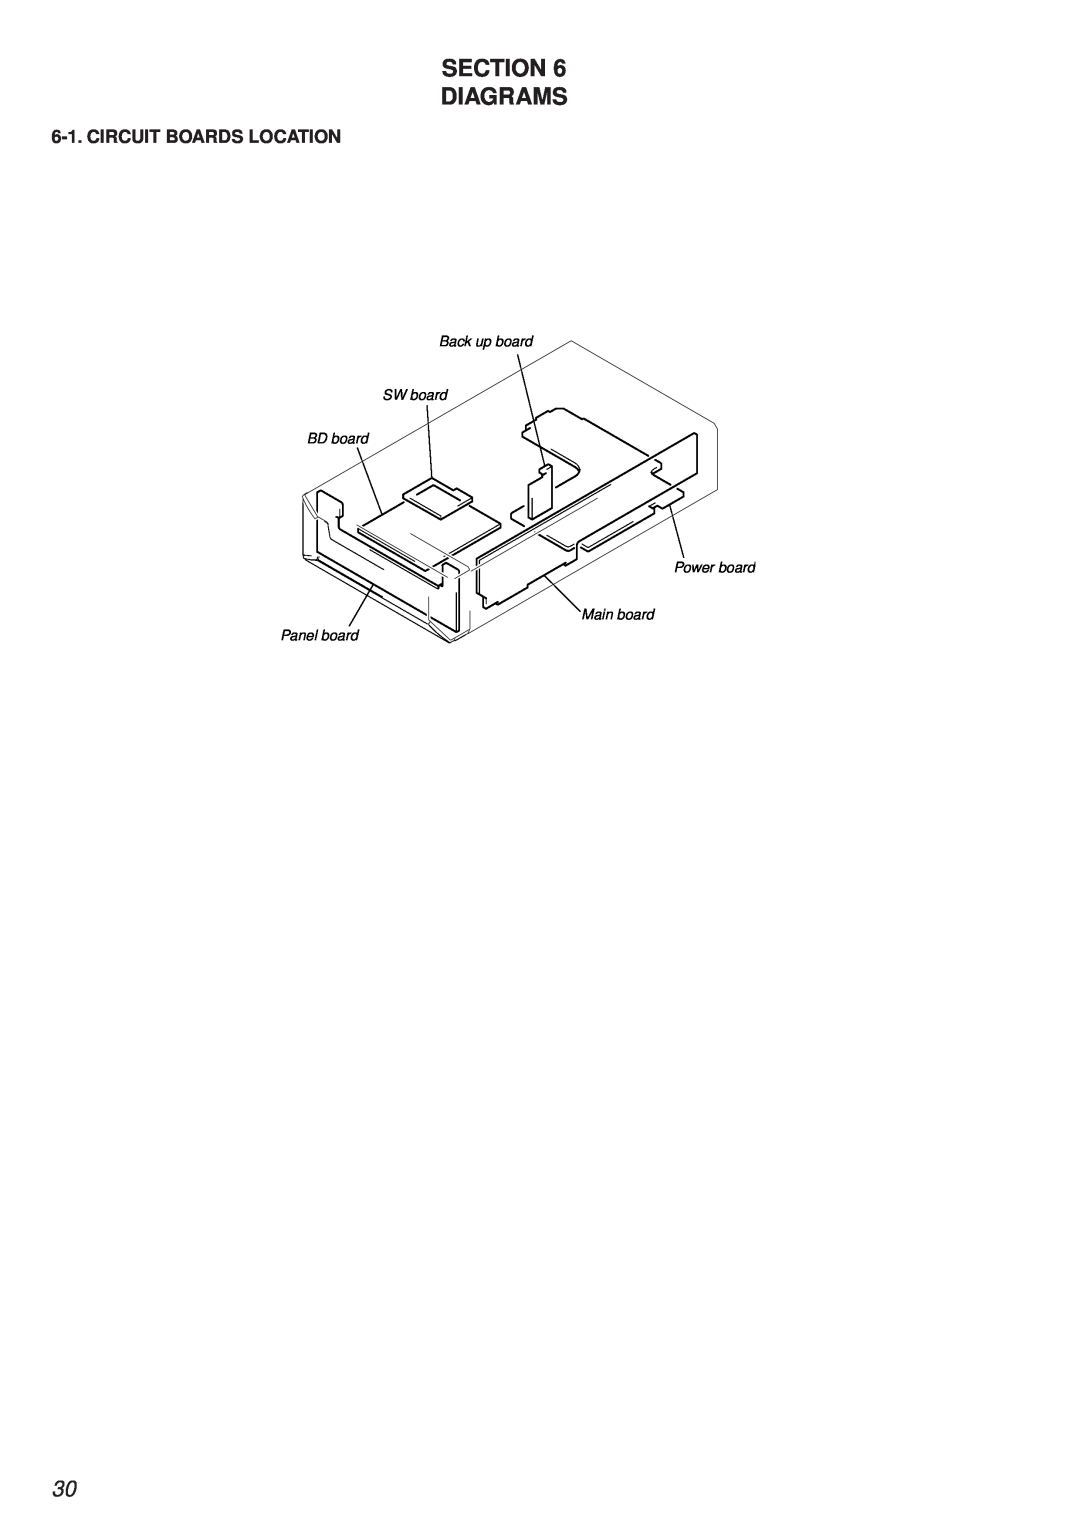 Sony MDS-PC2 service manual Section Diagrams, Circuit Boards Location 